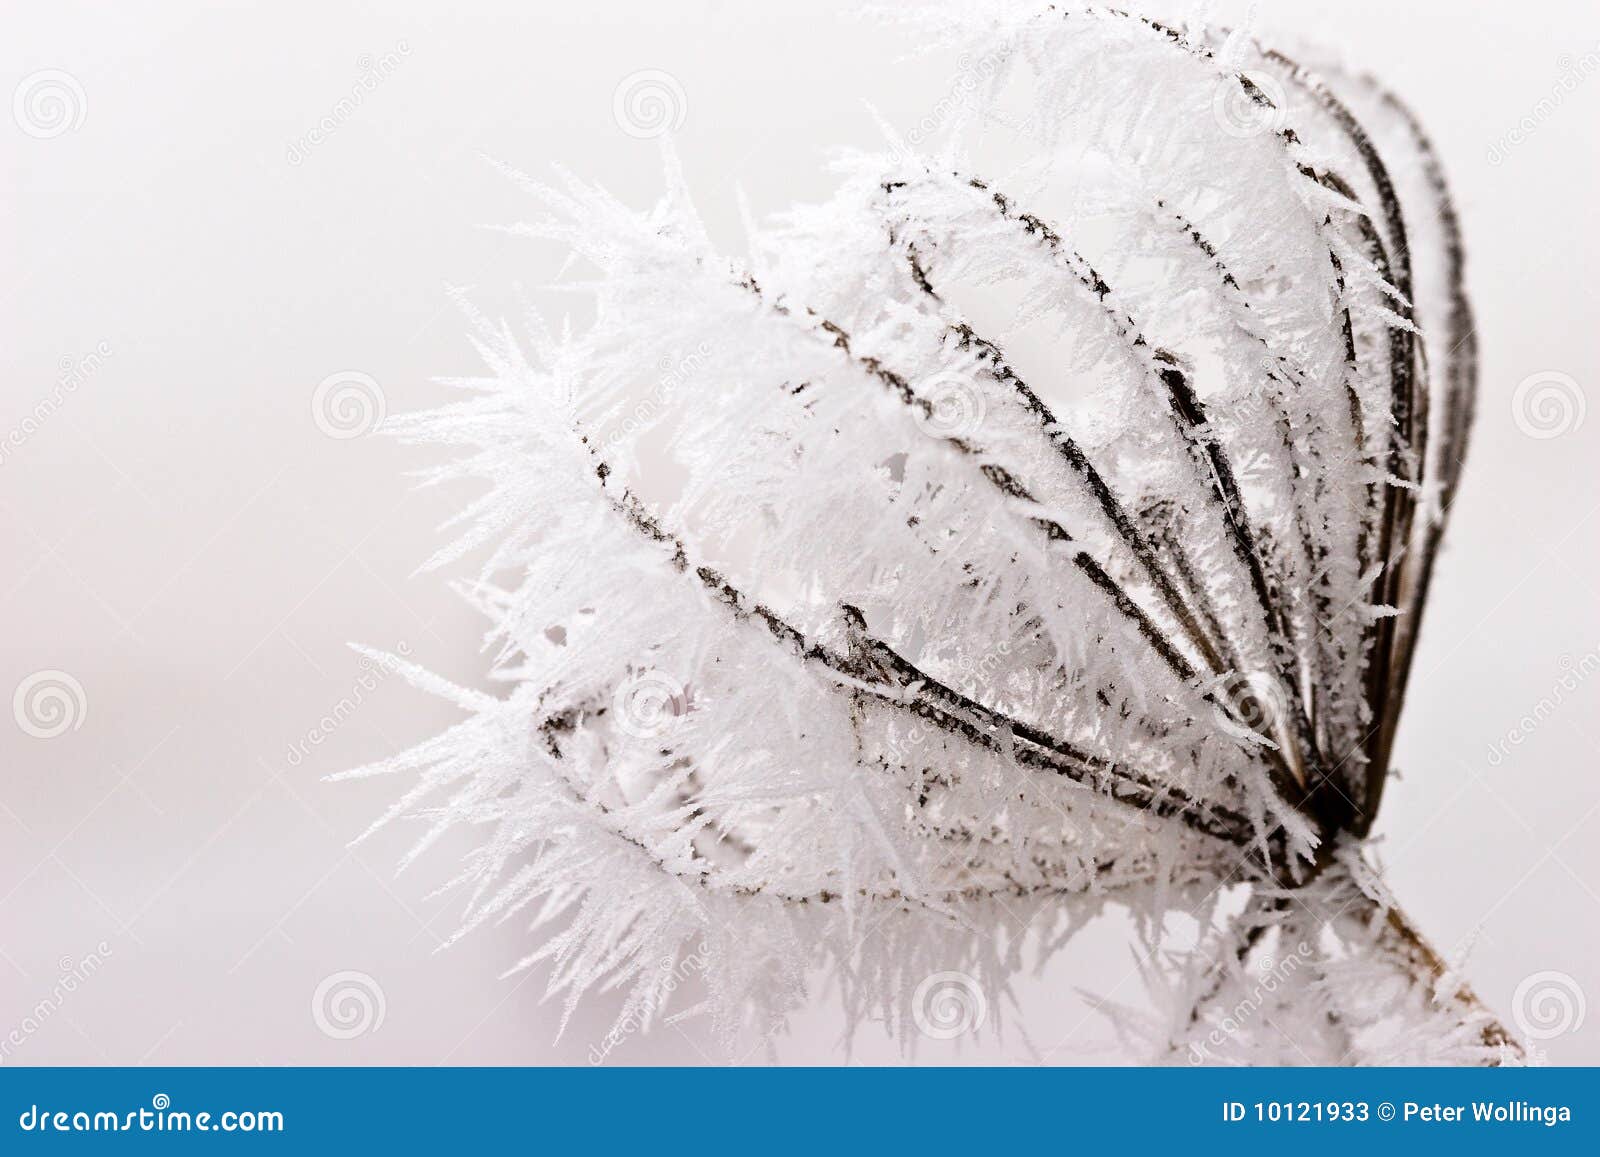 hoar frost or soft rime on plants at a winter day